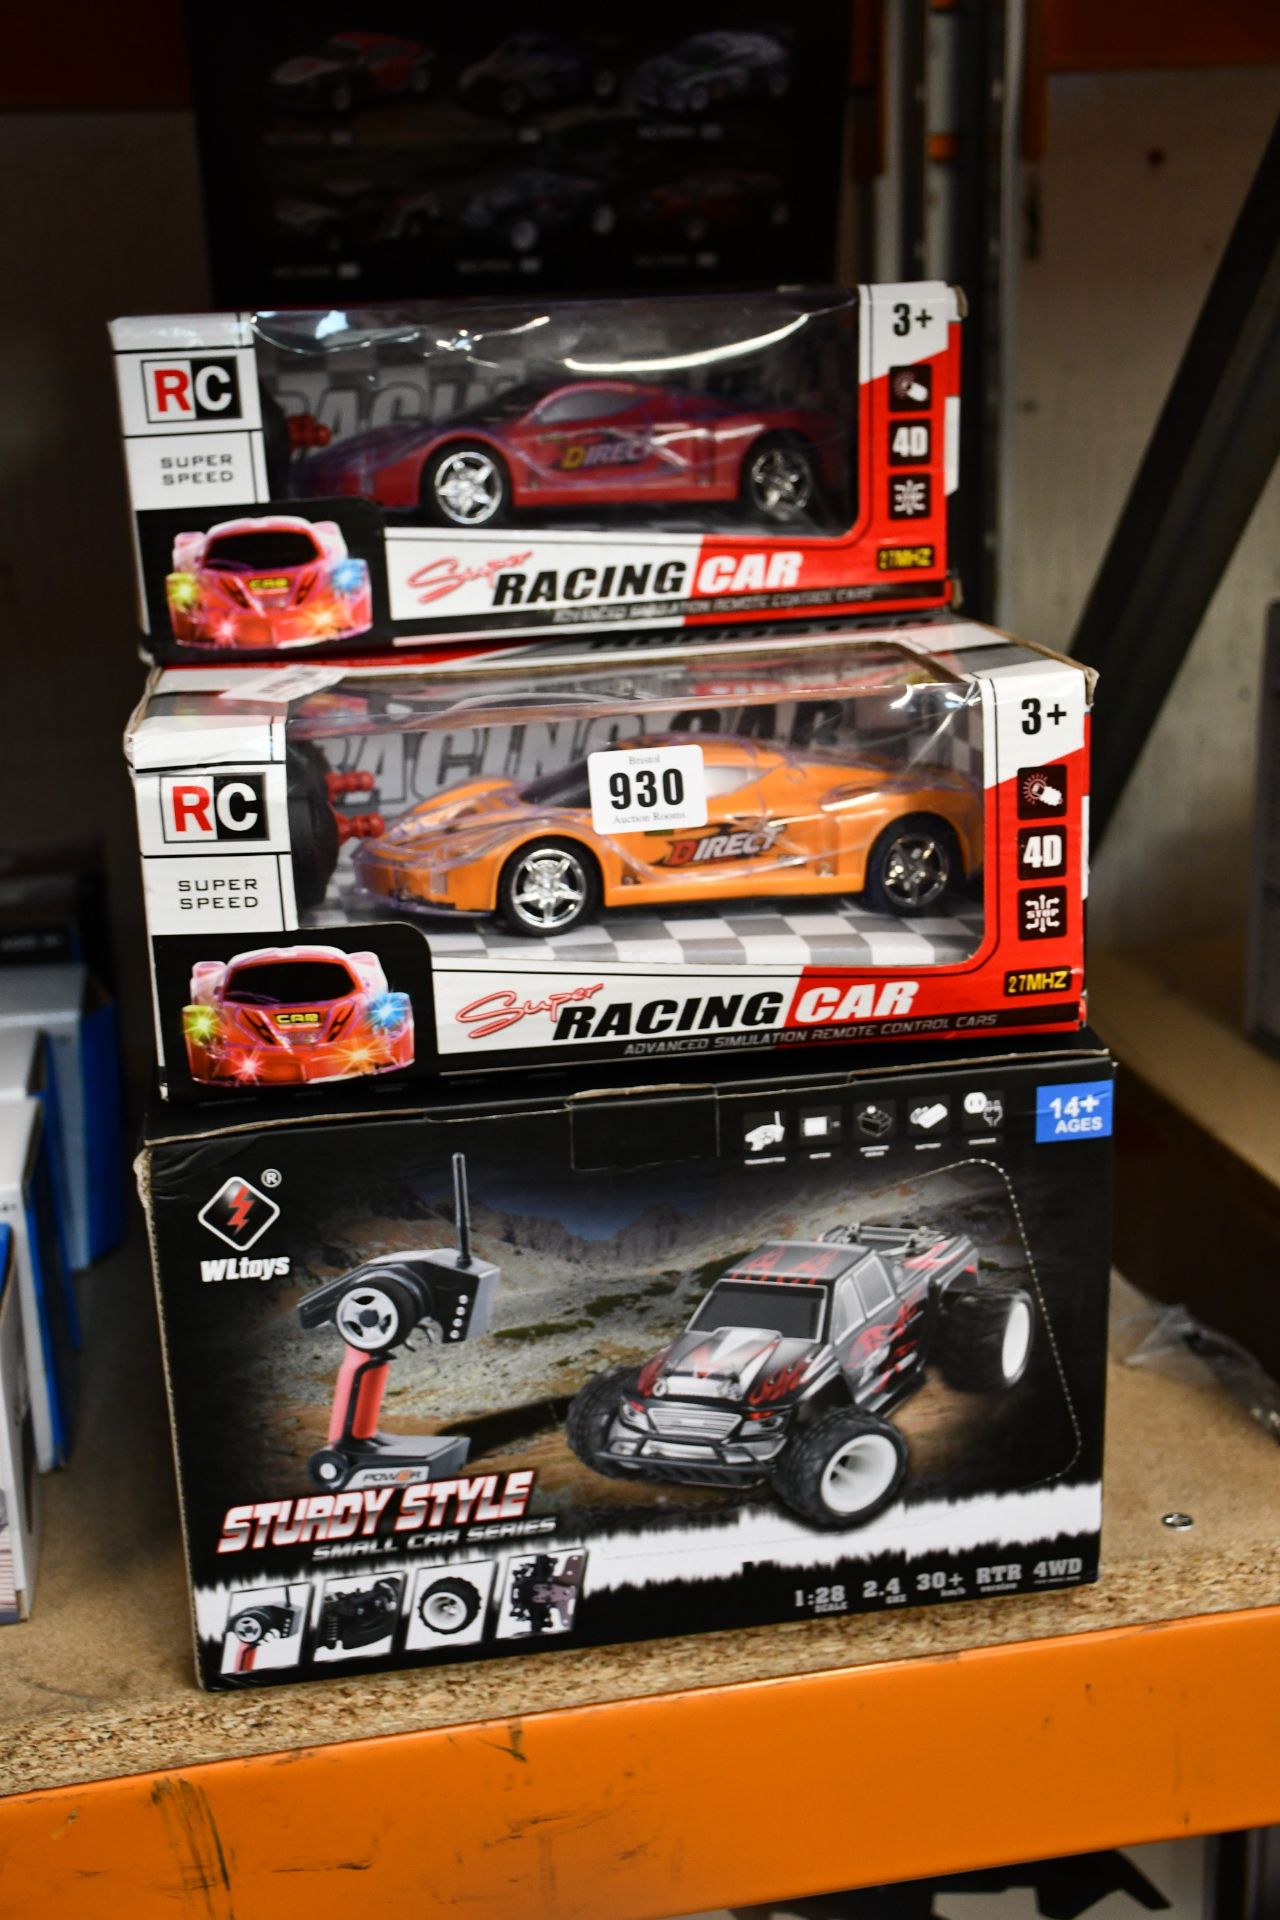 Seven as new WL Toys Sturdy Style Small Car Series RC cars together with three RC Super Speed racing